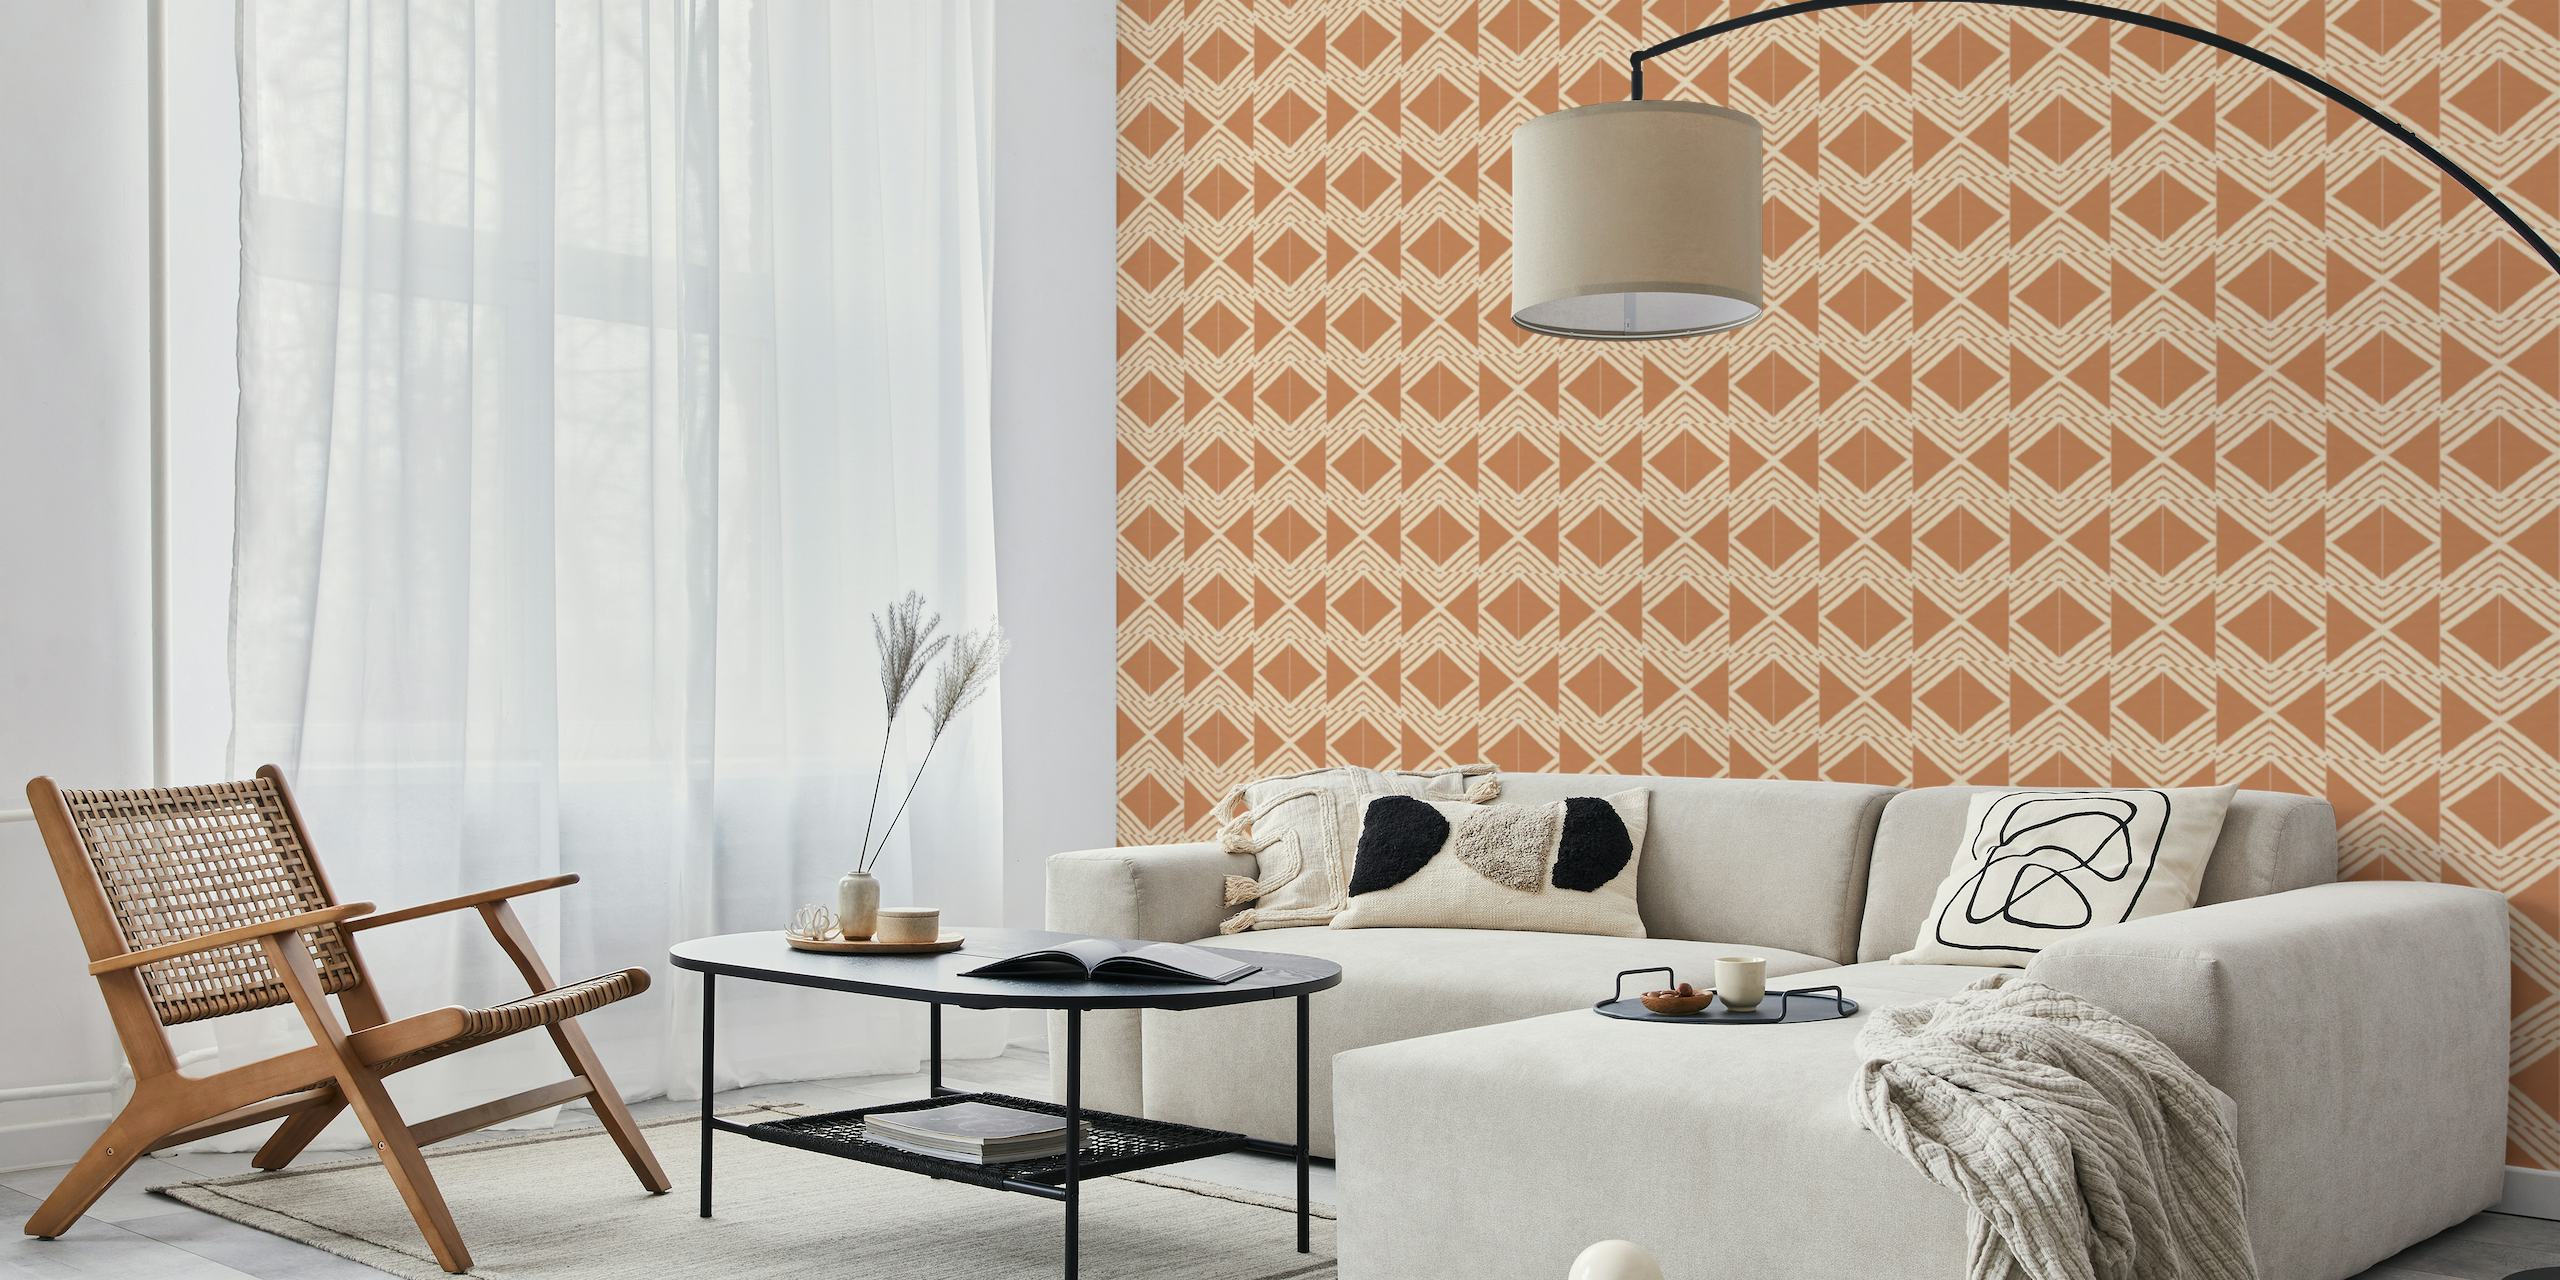 Rustic terracotta-style patterned wall mural with X-shaped designs